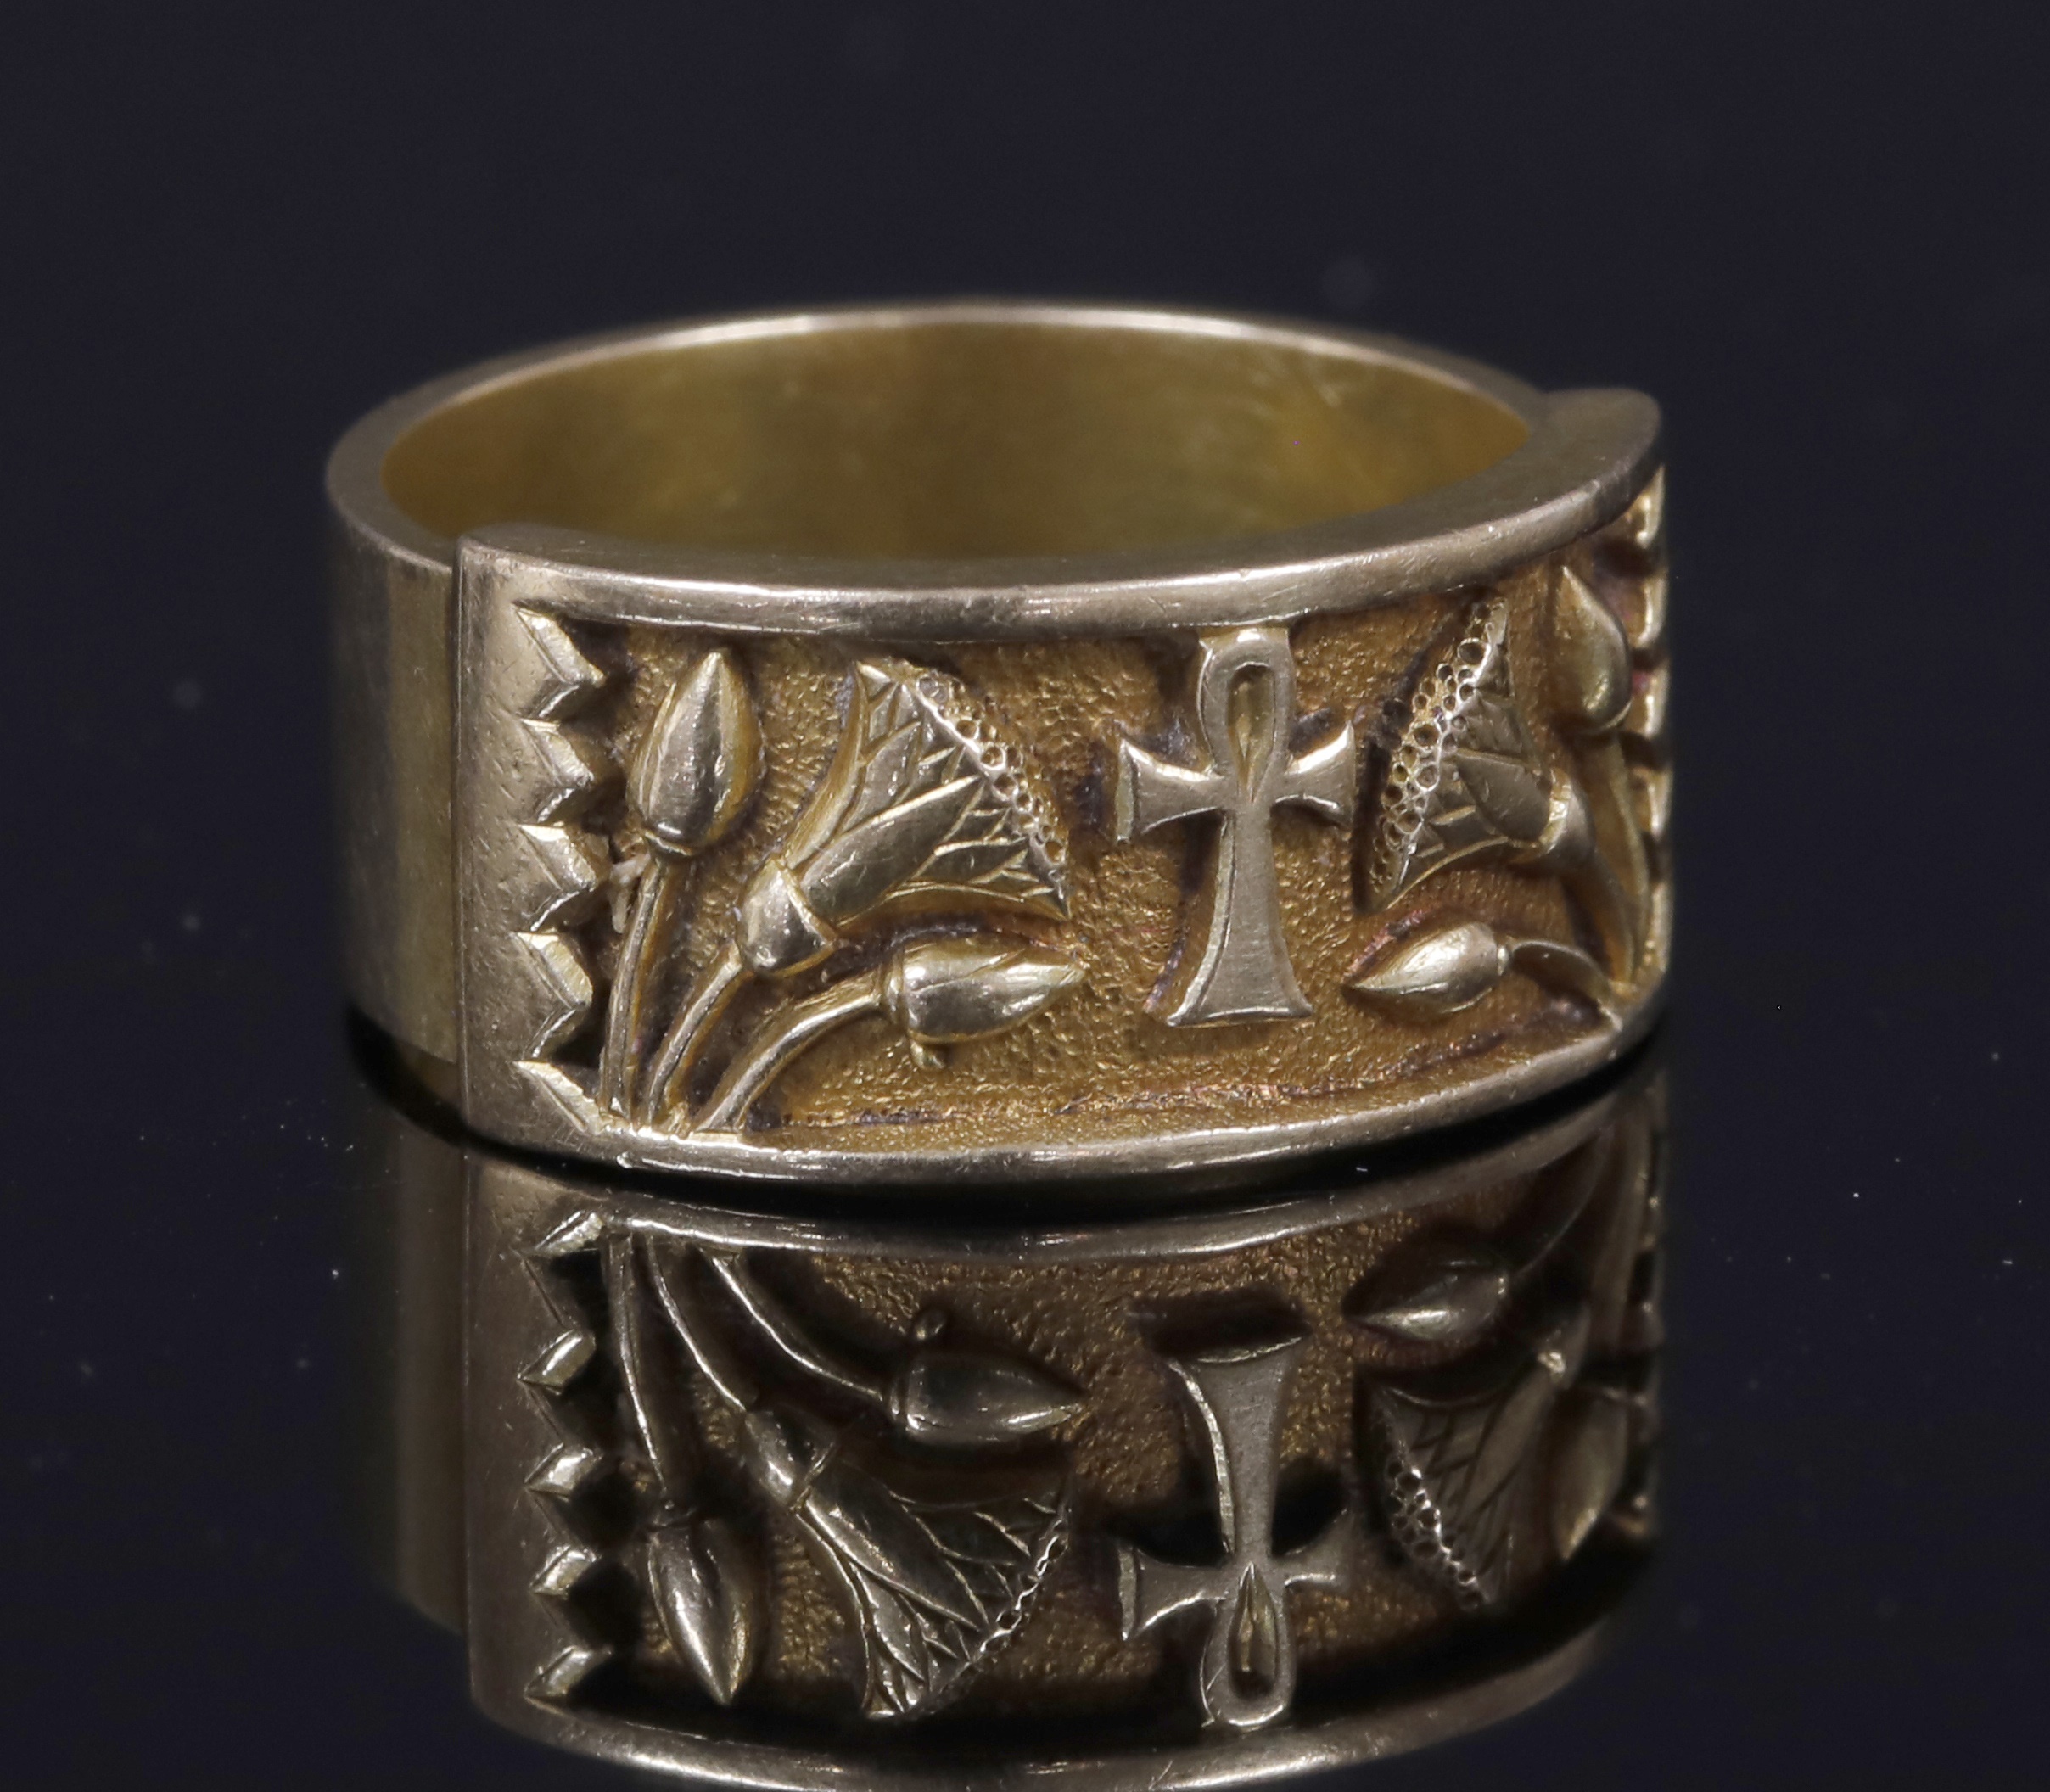 An Egyptian Revival ring, c.1900, with ankh and lotus motifs. The ankh hieroglyph represents the word for life, whilst the lotus flower was associated with Sun god Atum-Ra and symbolised creation and rebirth.  Lot 145, Fine Jewellery Sale, 19th November 2019 Hammer £380